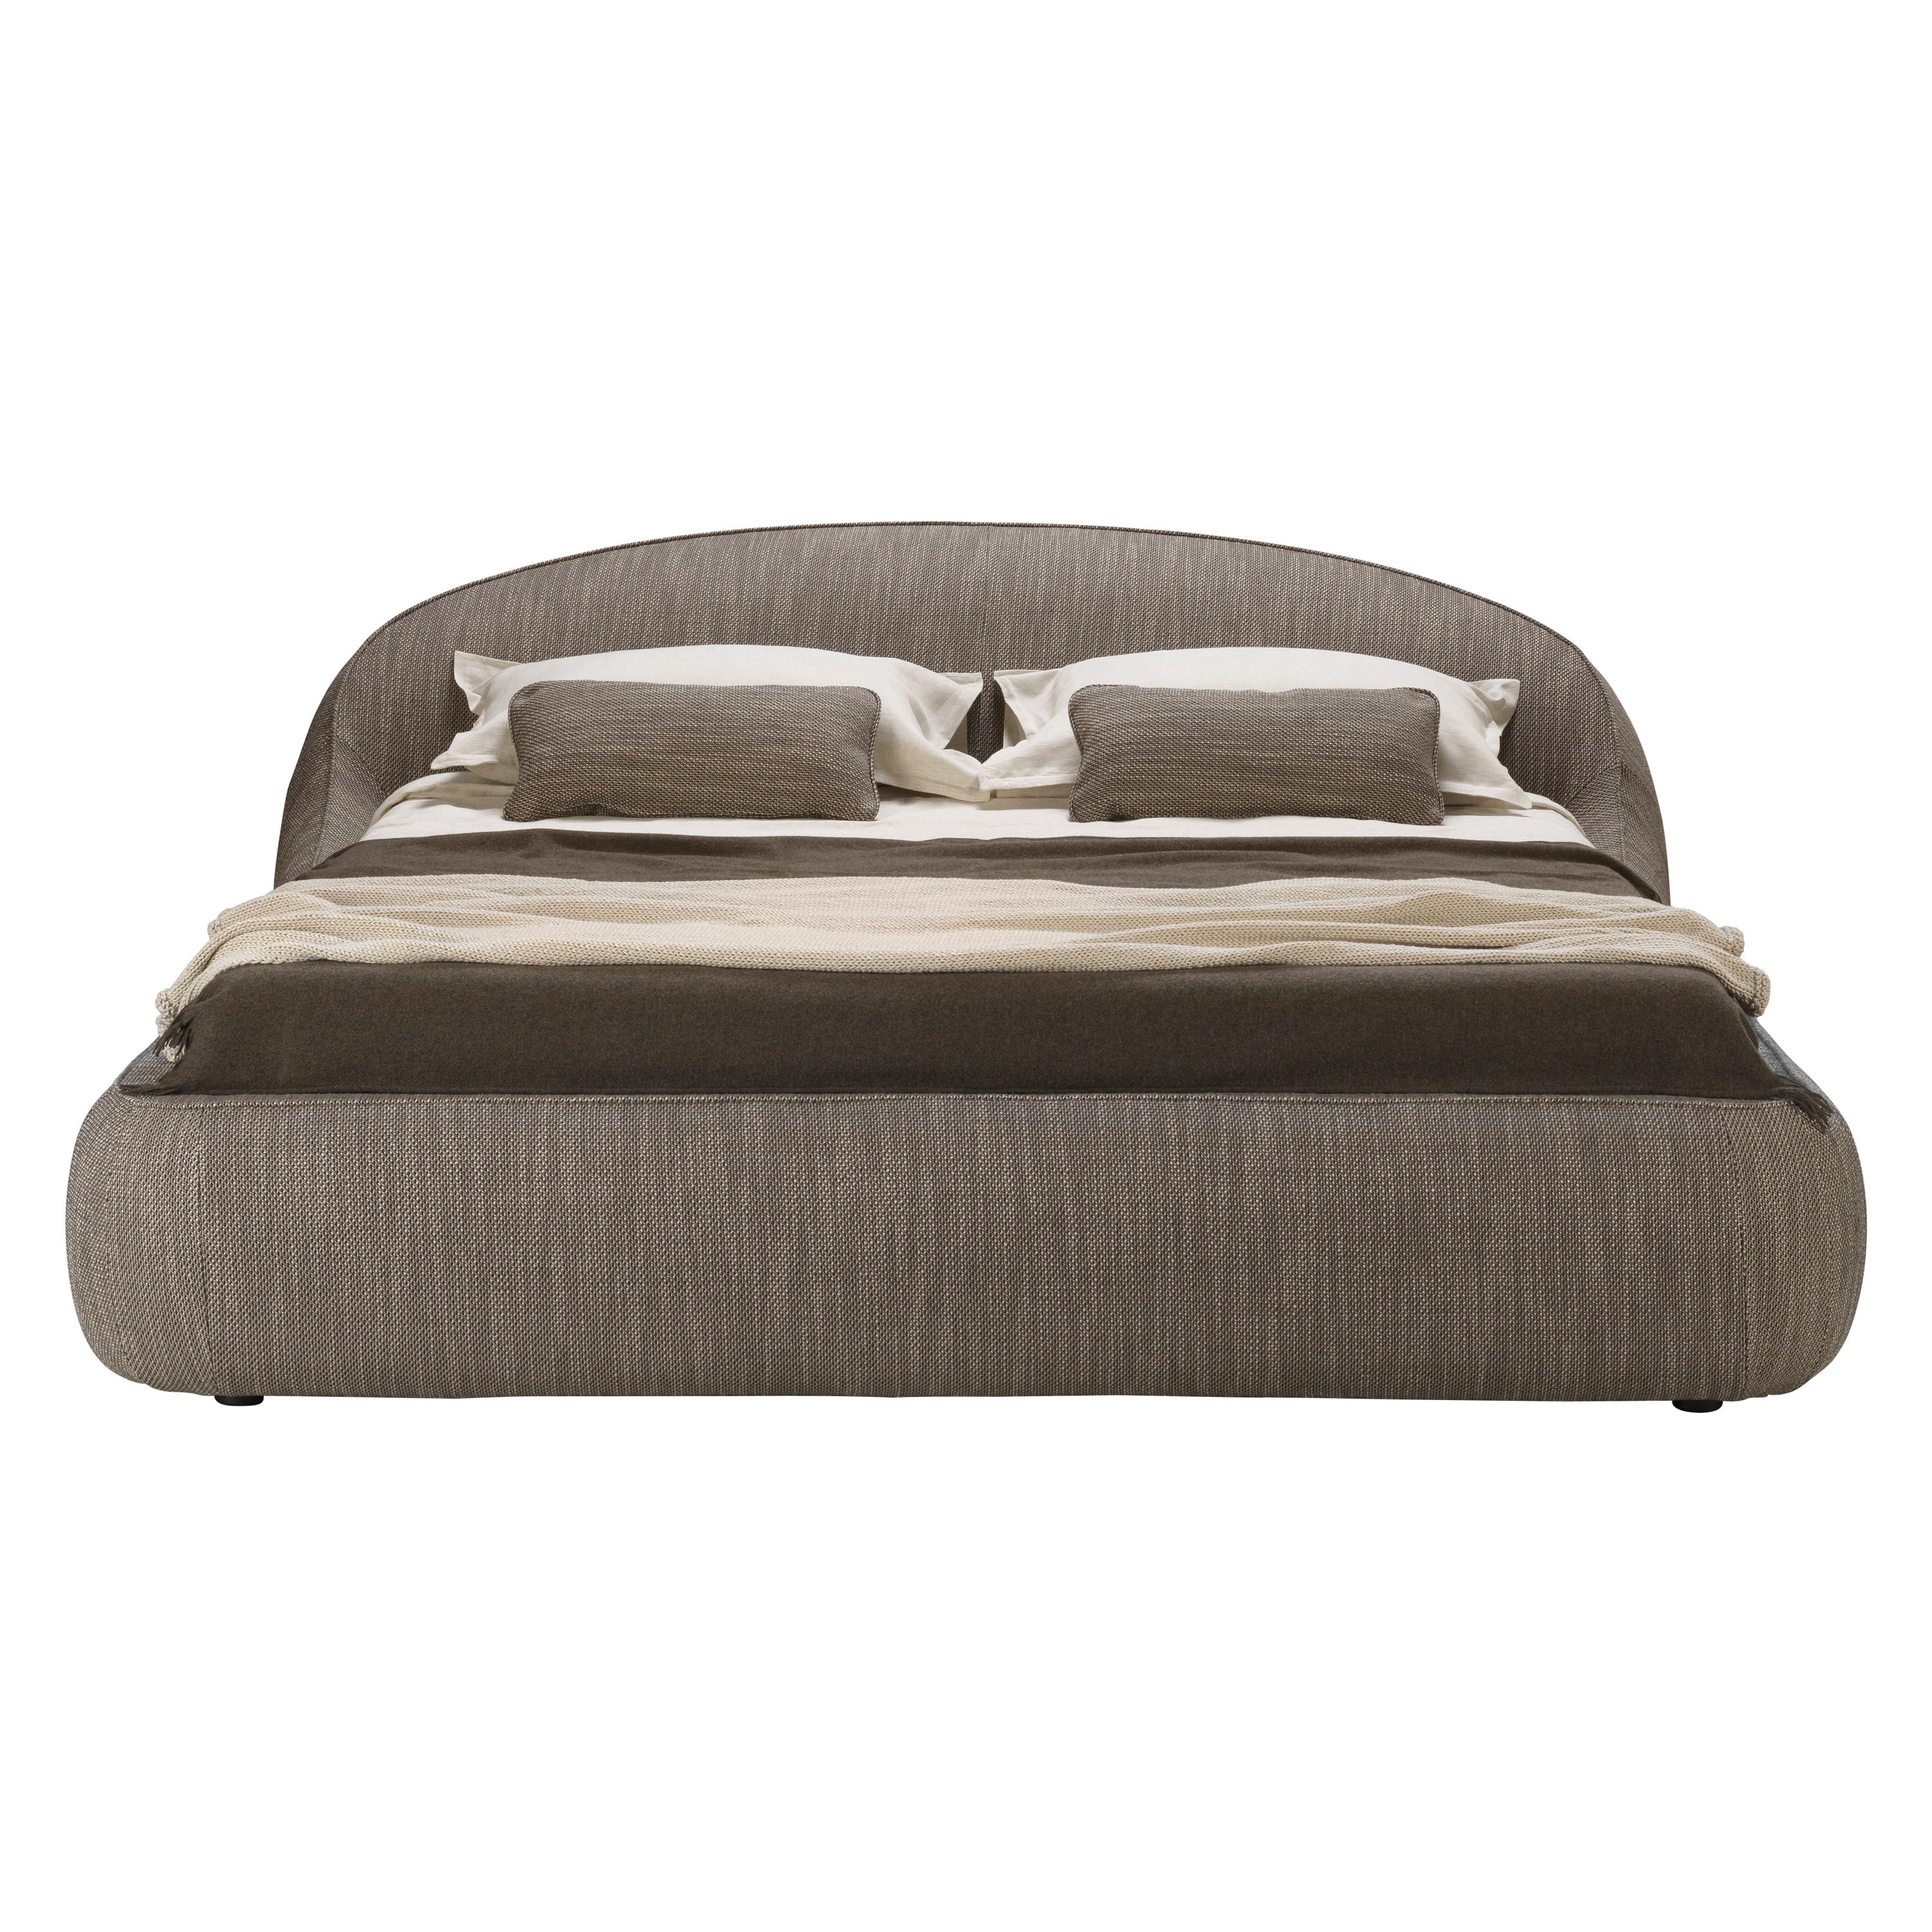 Abbracci Bed, Bed in Fabric Bogardine, Taupe Colour, Made in Italy